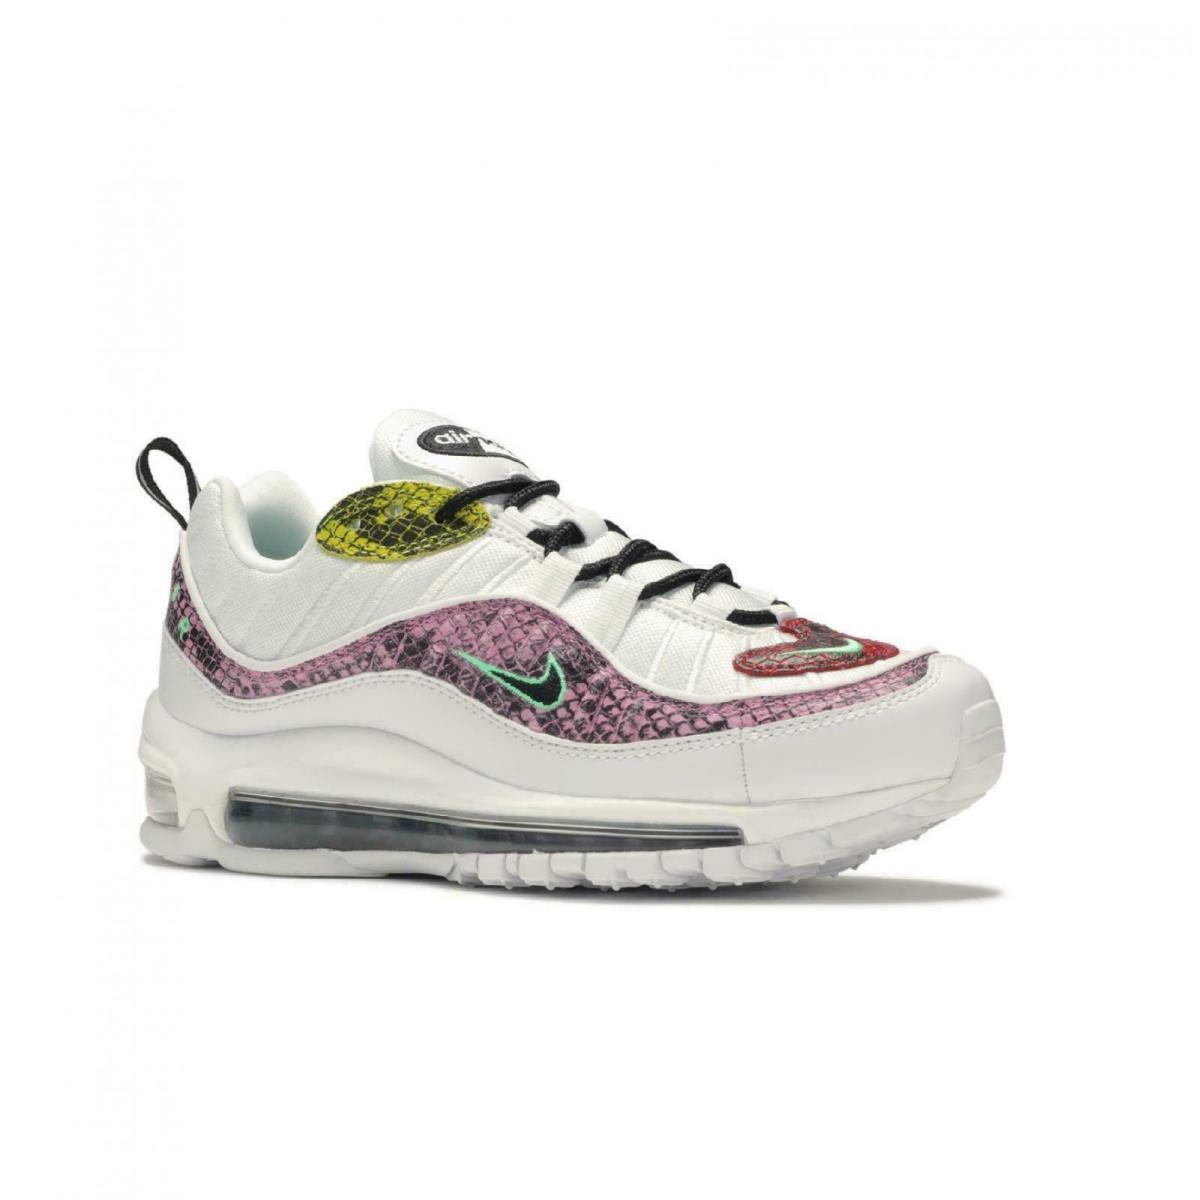 Nike Air Max 98 Prm Womens Shoes Size 6 Multi-color Snakeskin BV1978-100